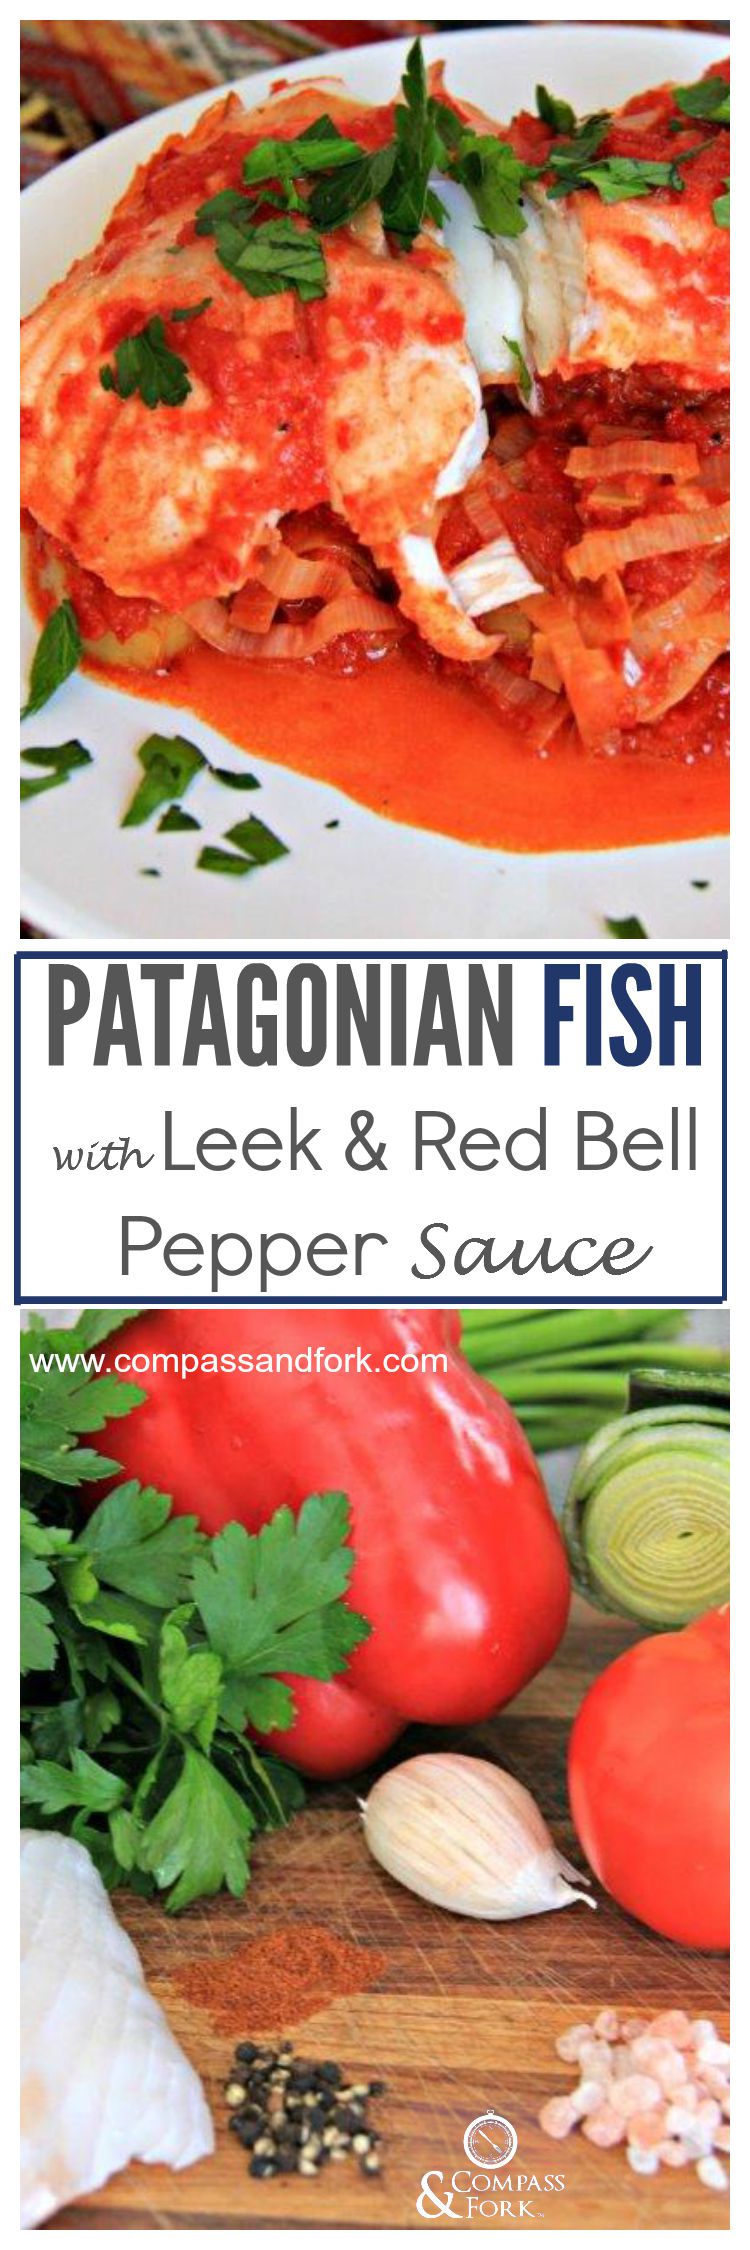 Patagonian Fish with Leek and Red Bell Pepper Sauce www.compassandfork.com